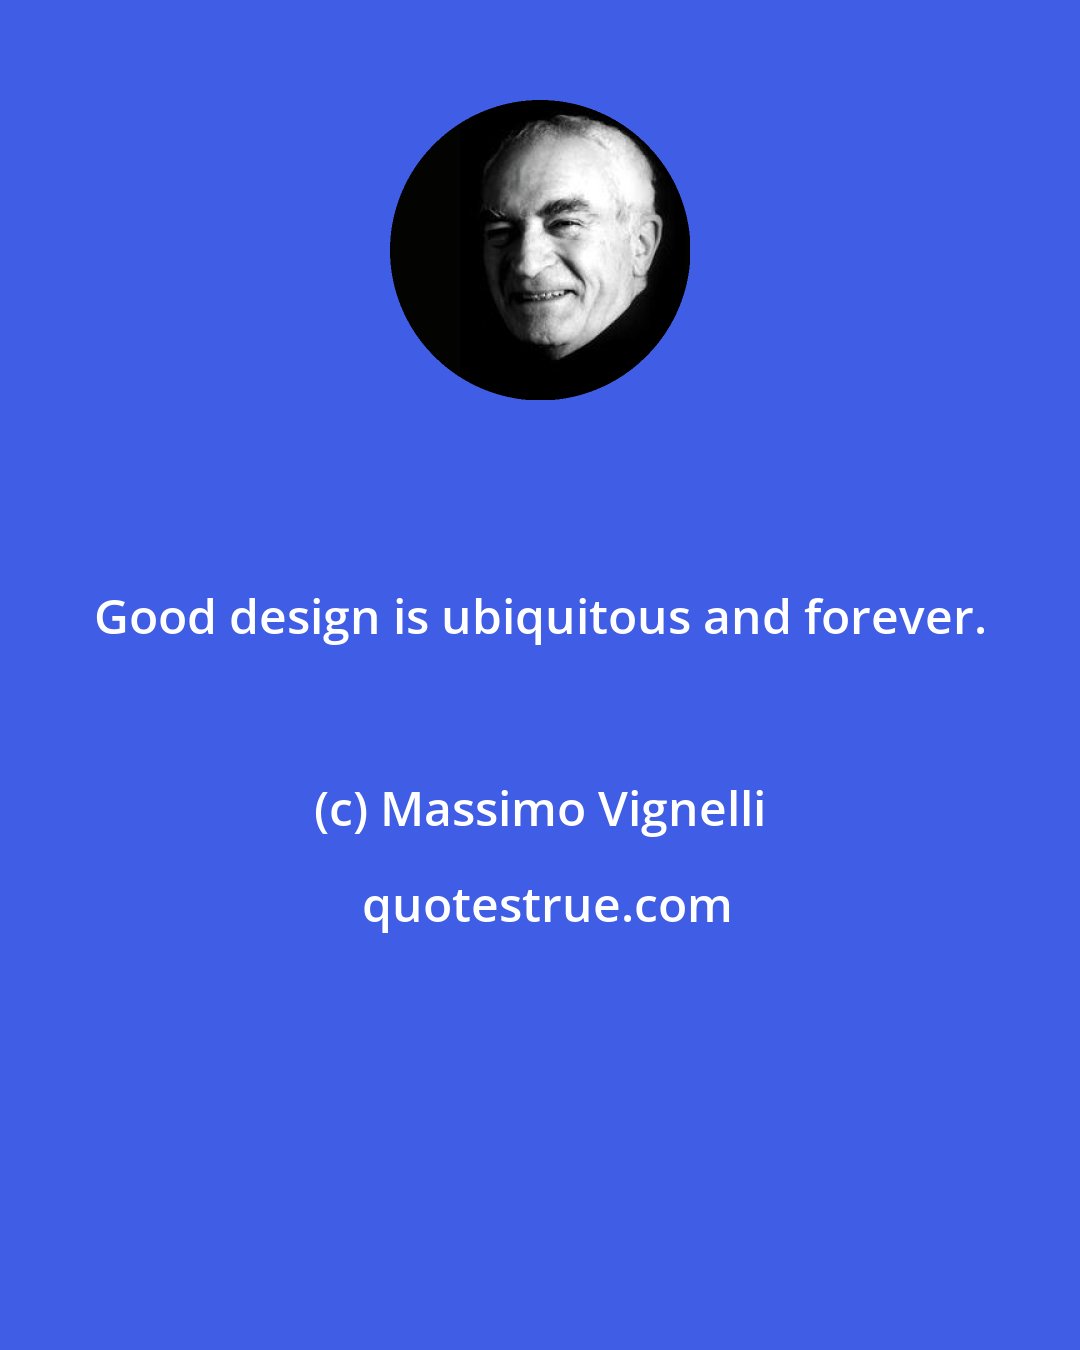 Massimo Vignelli: Good design is ubiquitous and forever.